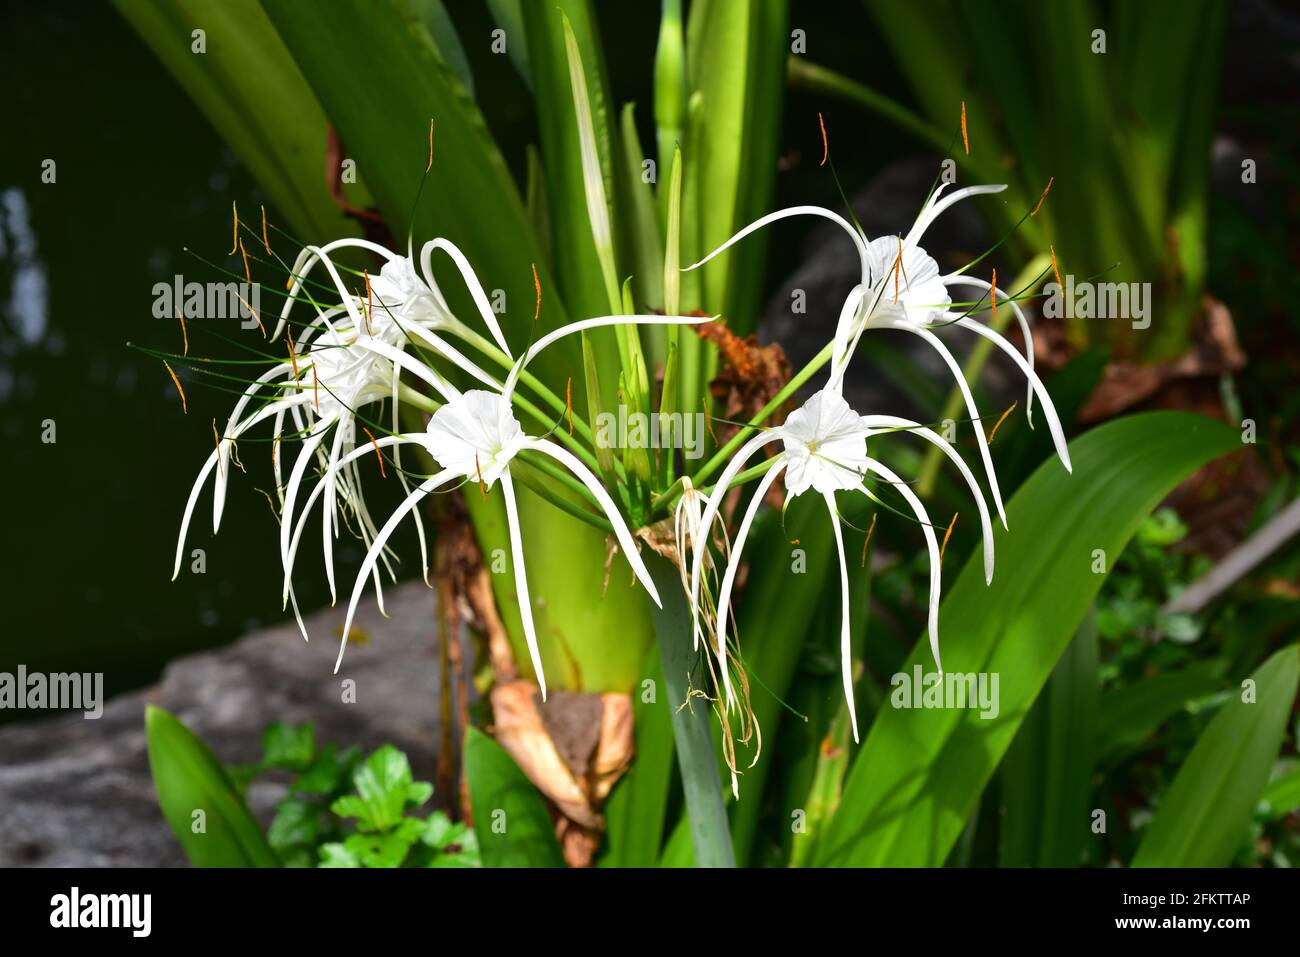 Spider lily or poison bulb (Crinum asiaticum) is a bulbous perennial plant native to tropical Asia. This photo was taken in Phuket, Thailand. Stock Photo